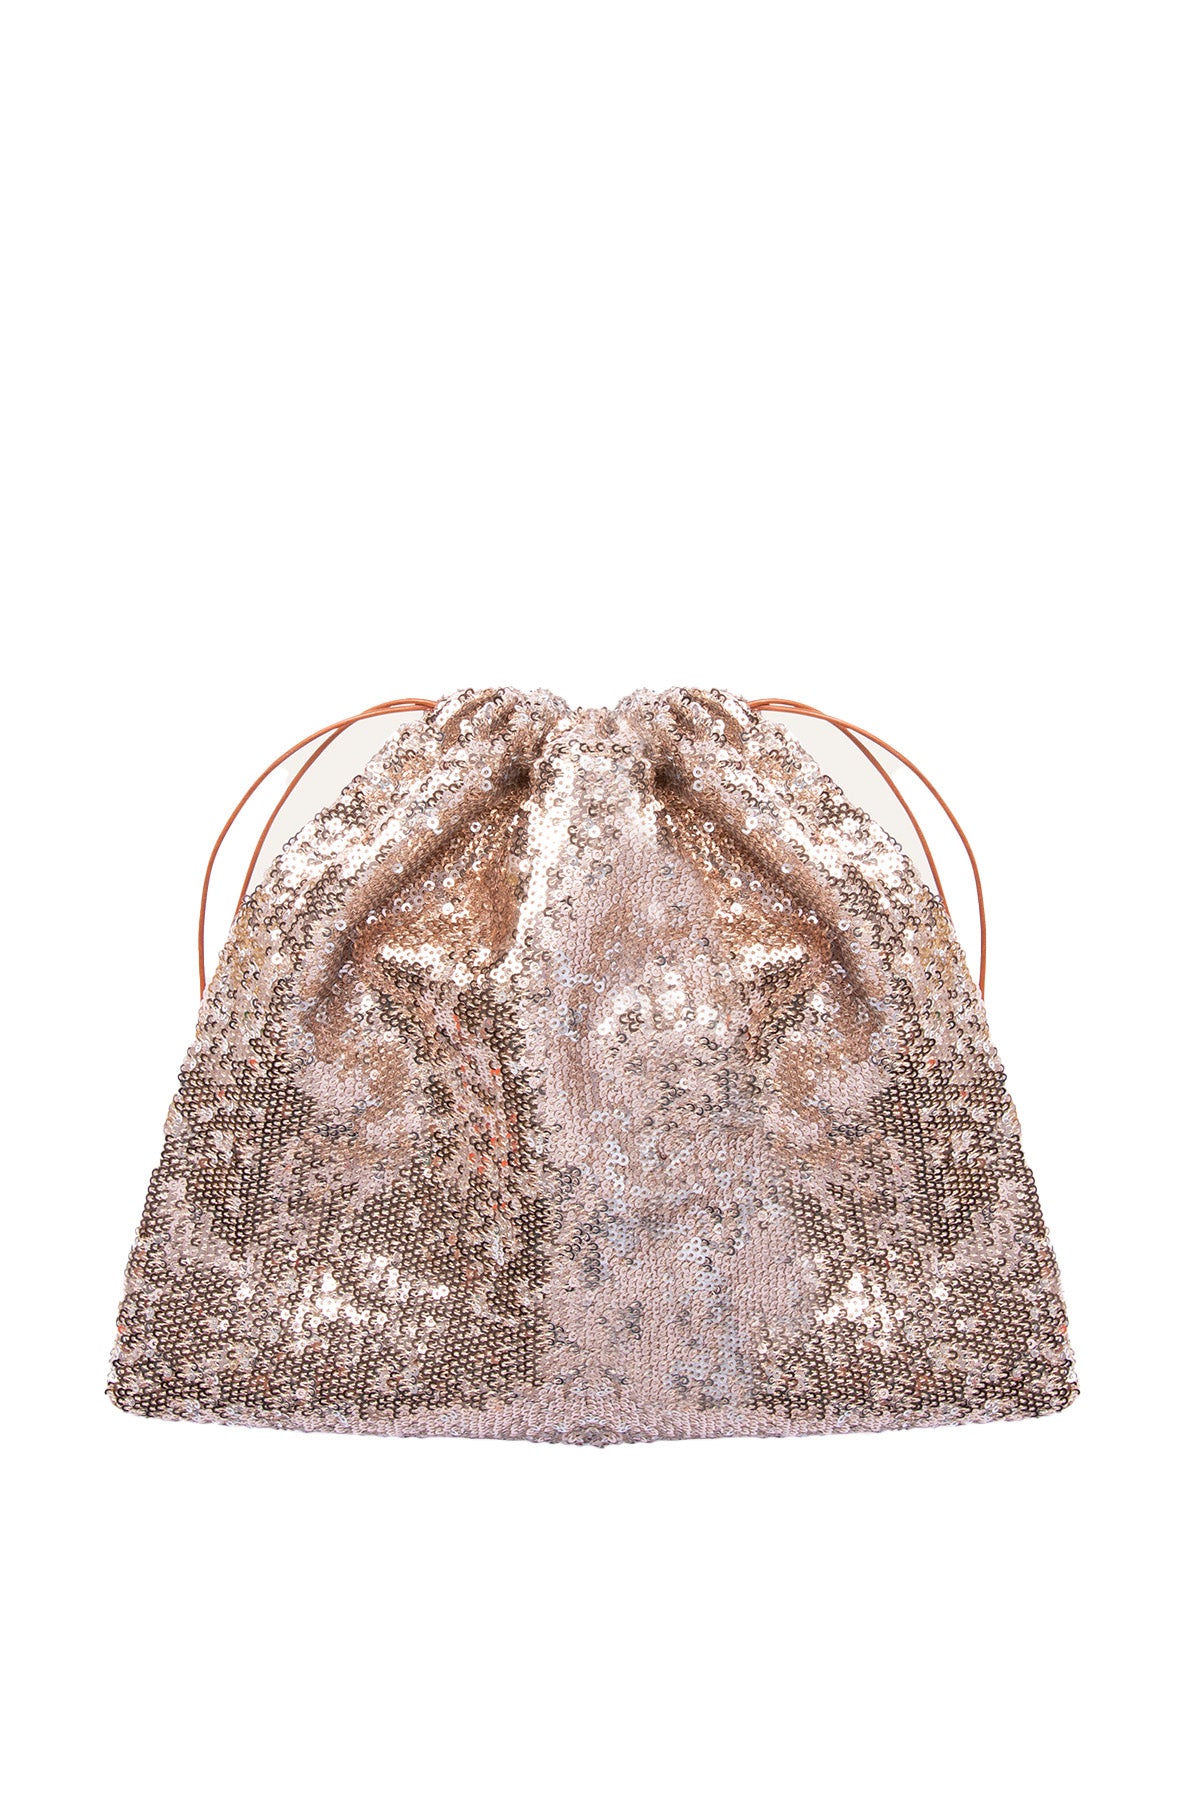 Sequin Pouch - Champagne